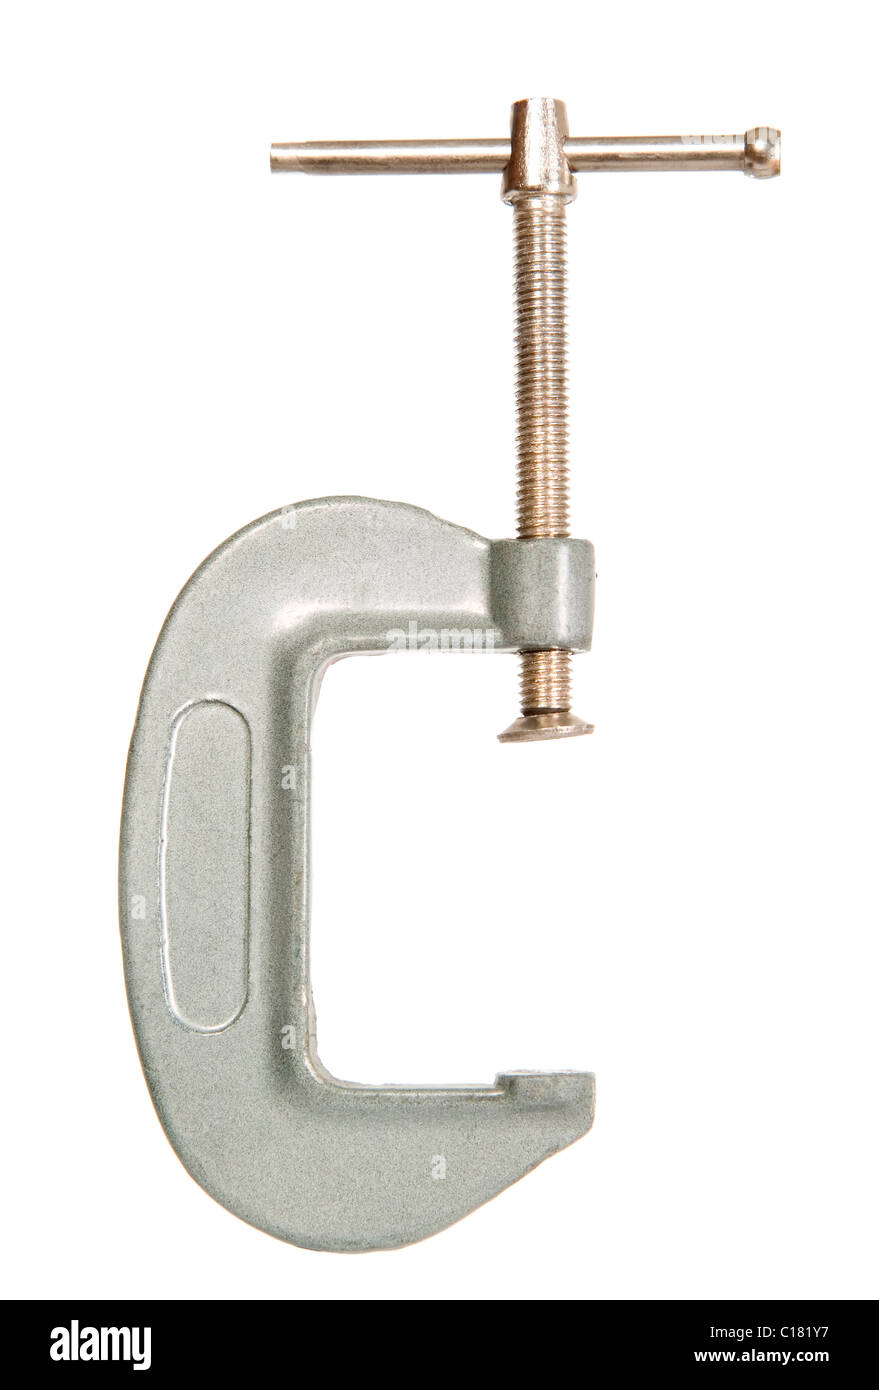 Metal work tool with thread for squeezing any detail Stock Photo